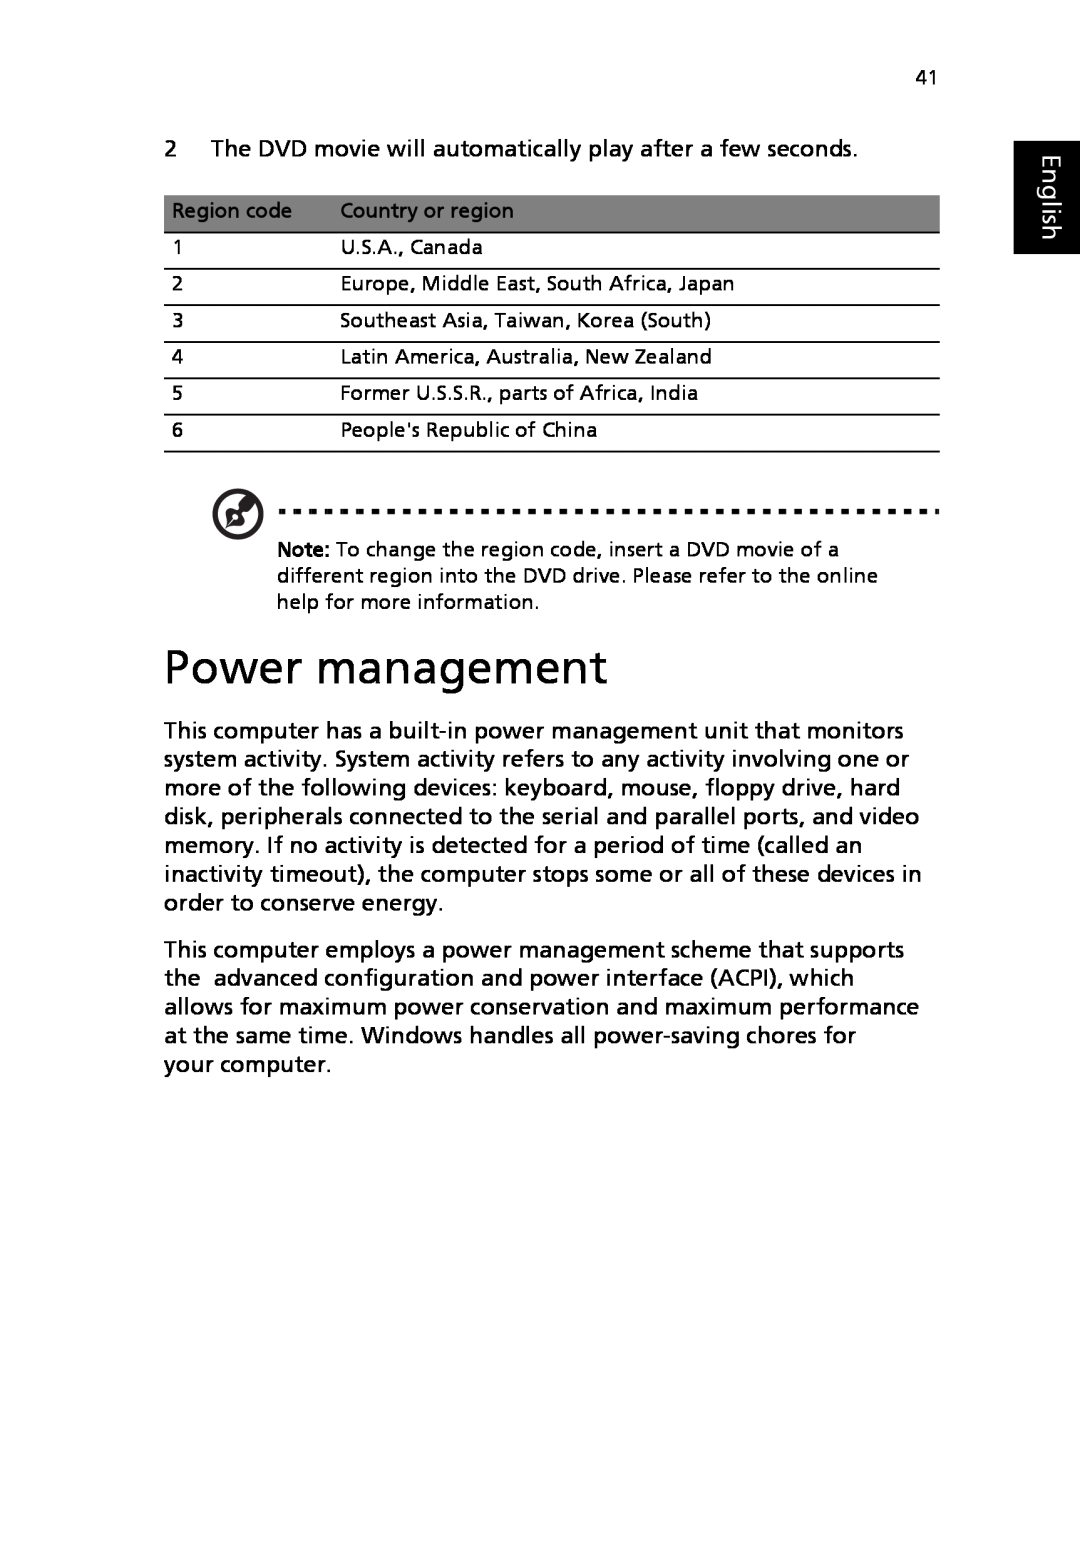 Acer 2310 Series manual Power management, English 